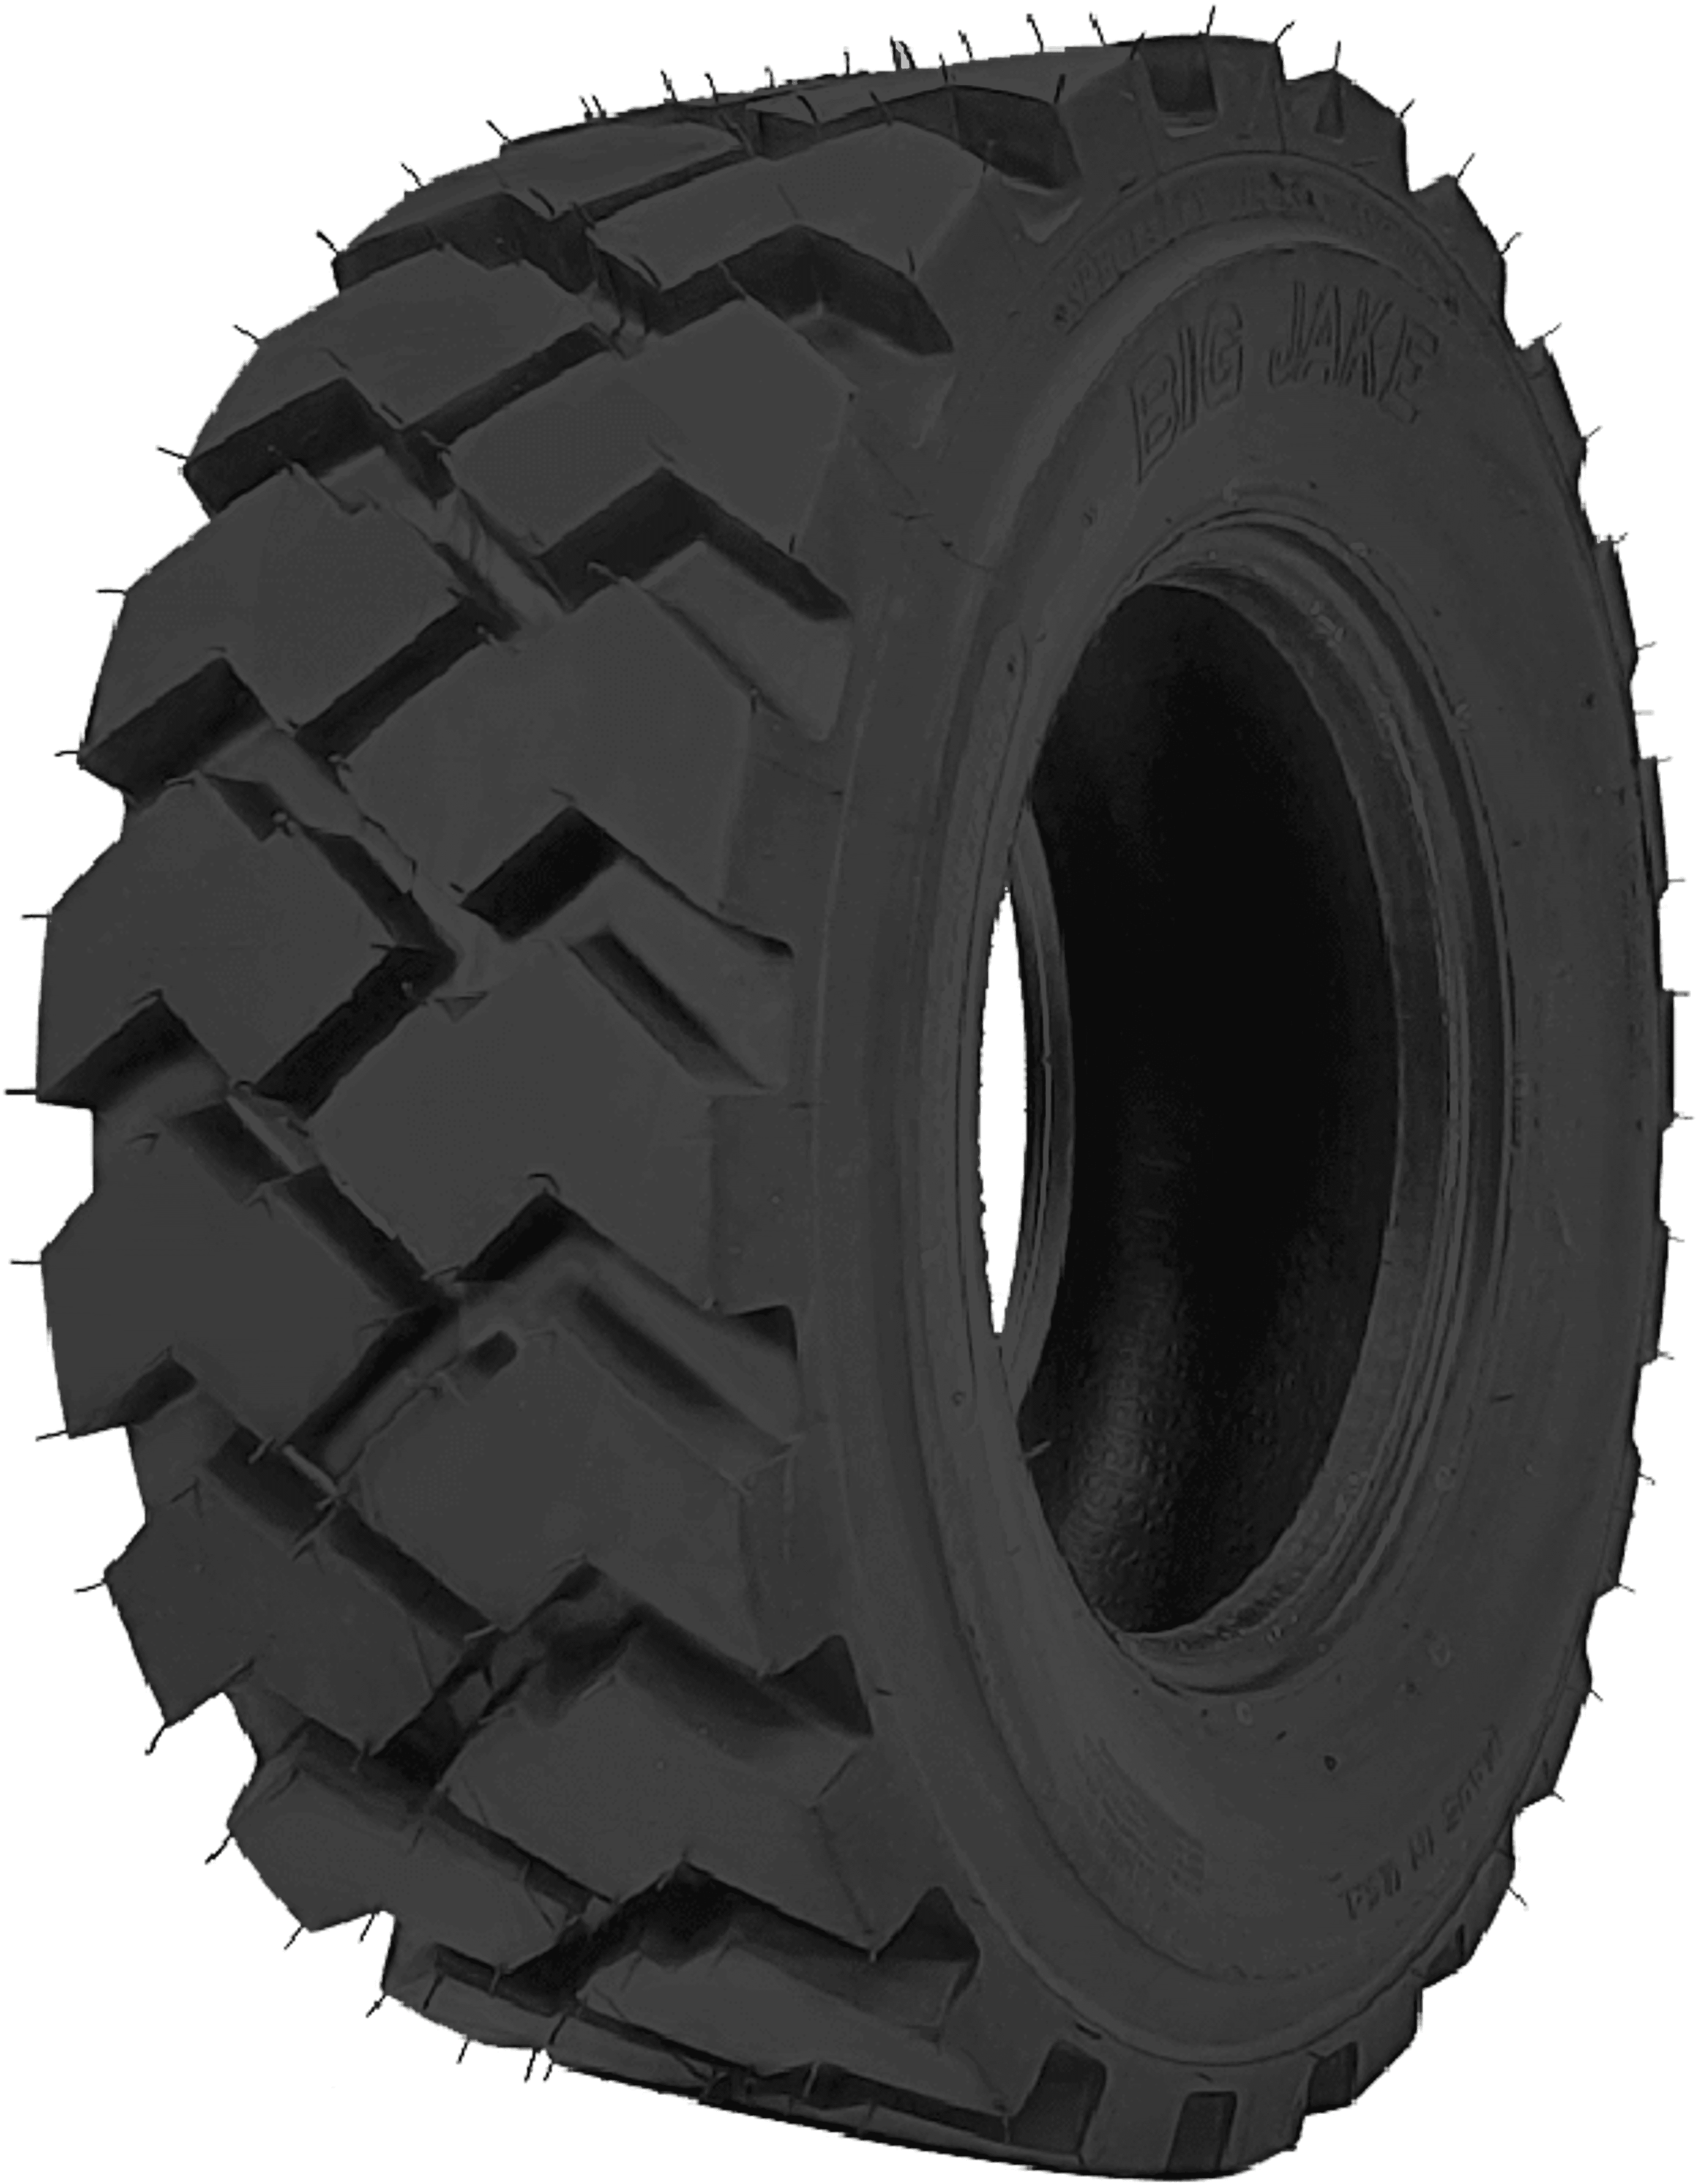 Specialty Tires of America